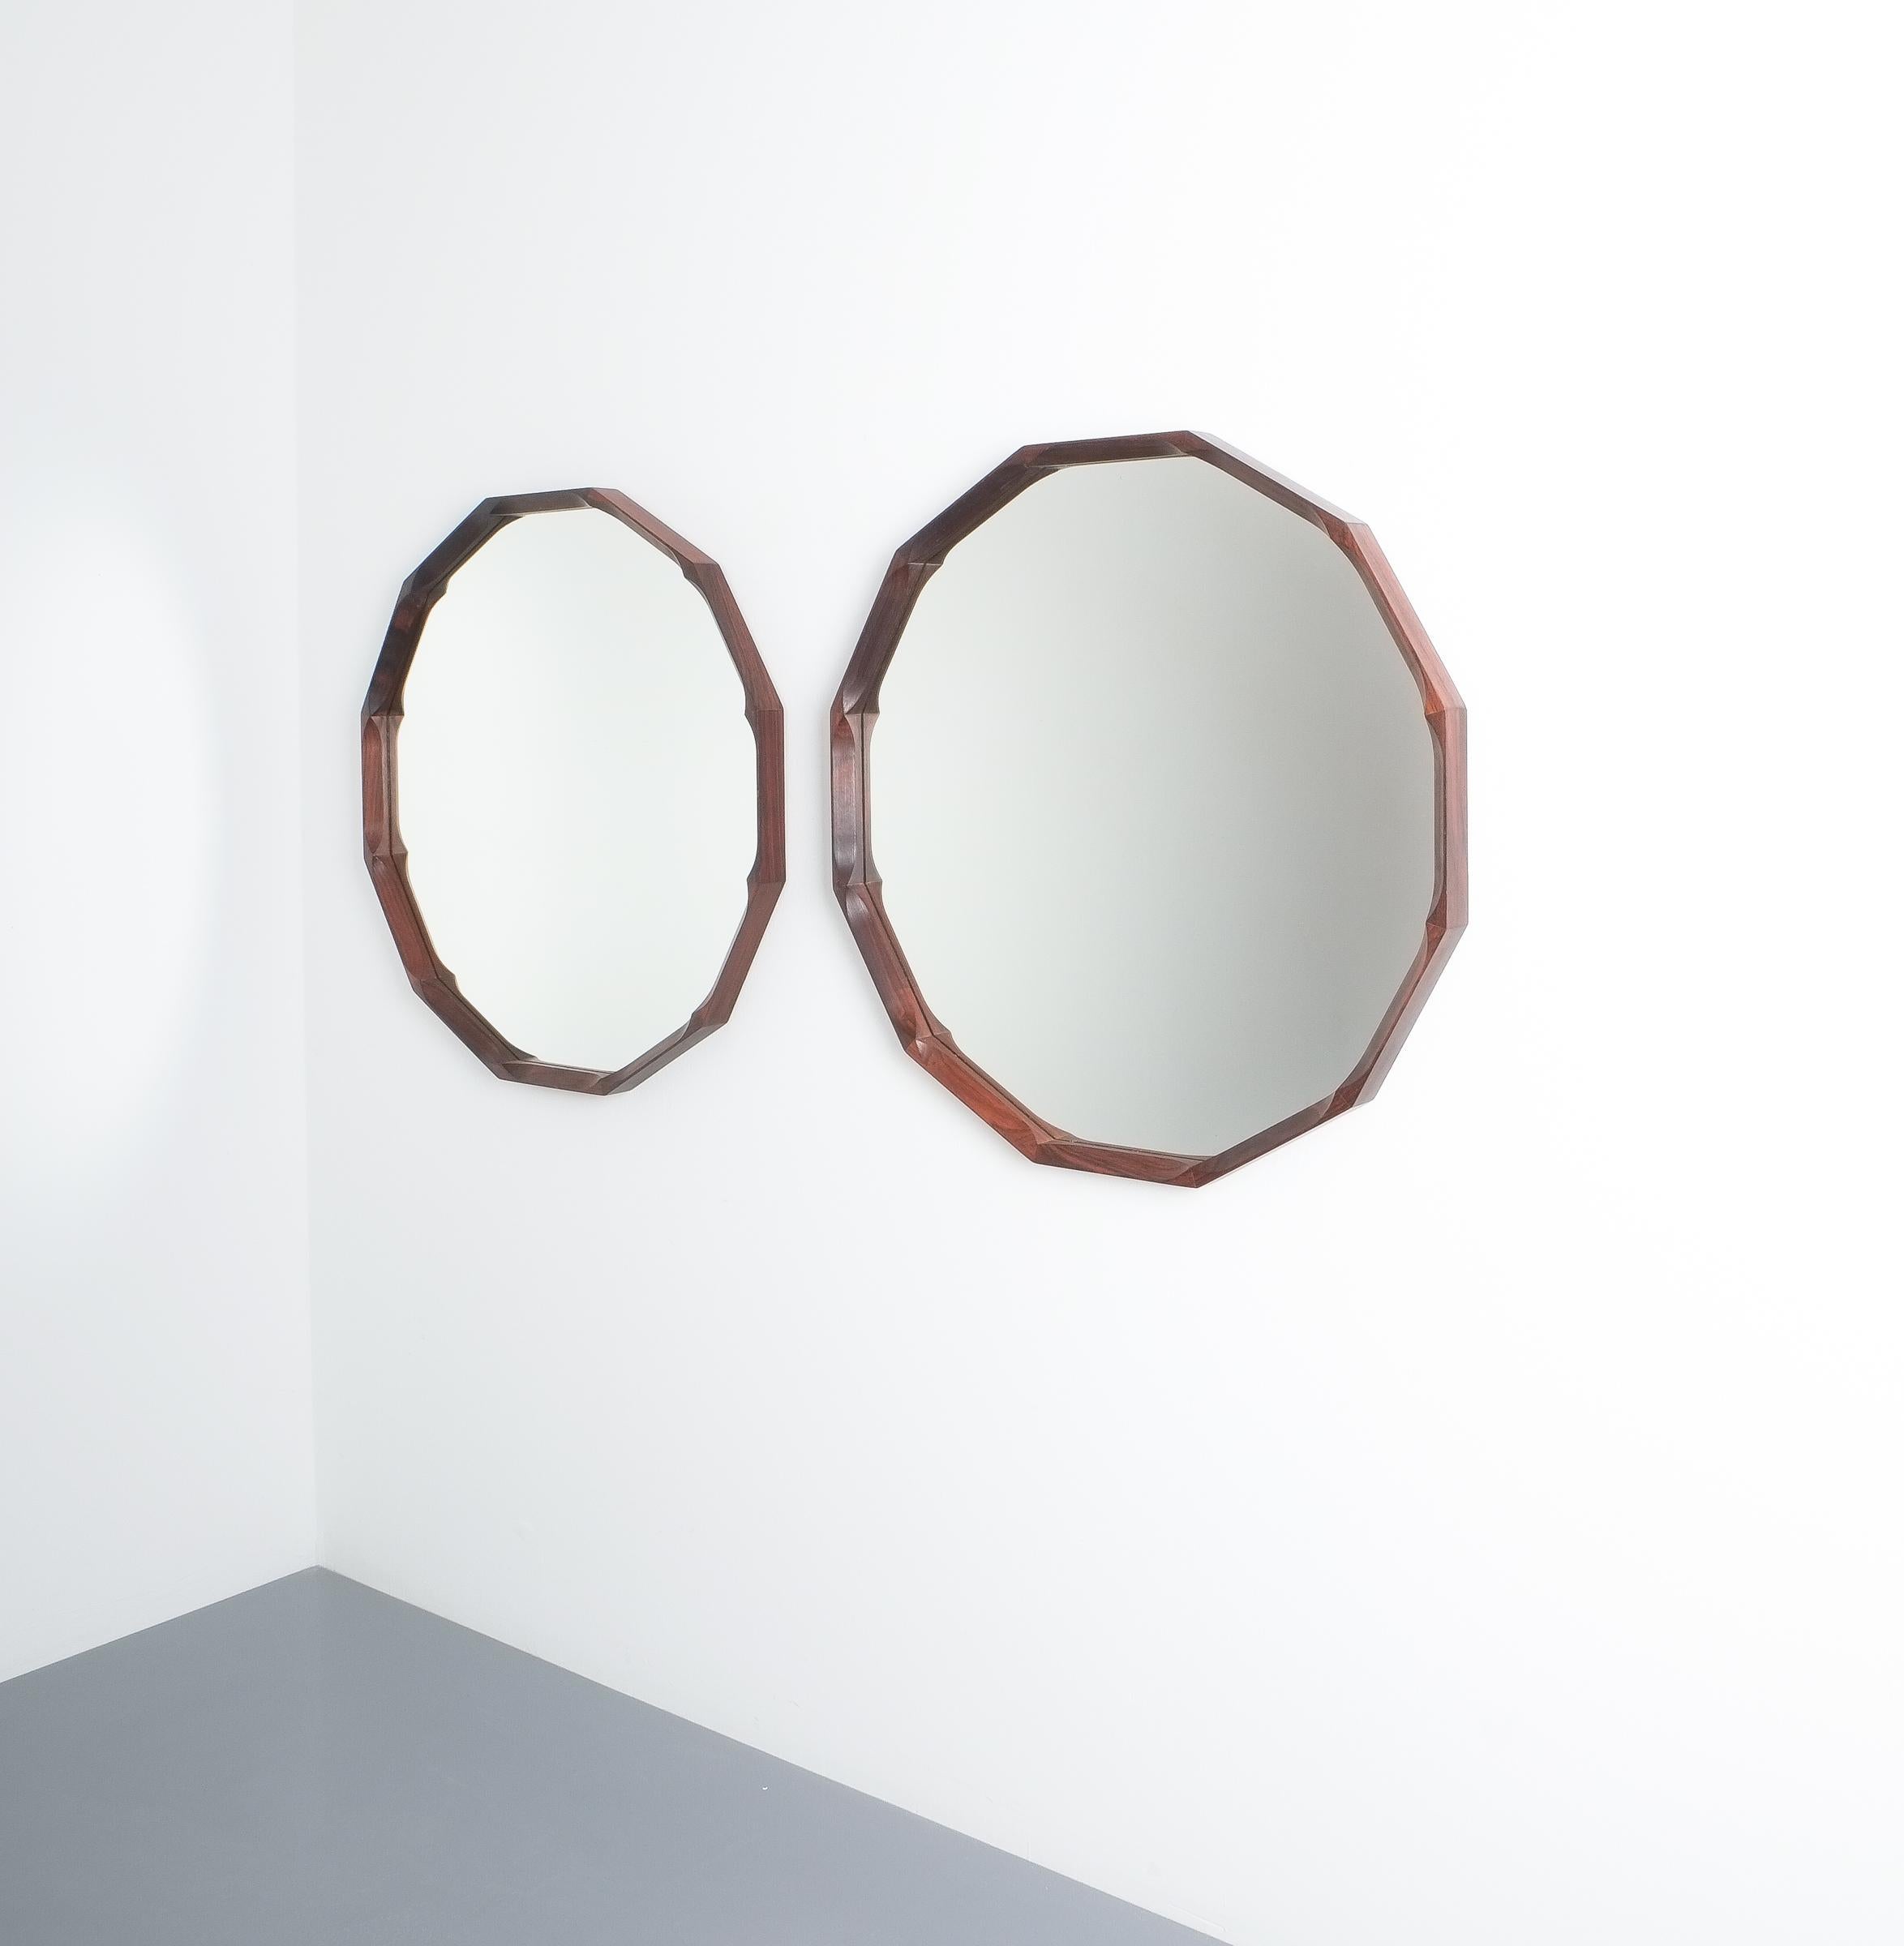 Polygonal walnut mirror by Dino Cavalli, Italy, circa 1960

Solid wooden mirror frame with a diameter of 24“ and mirror in very good condition, midcentury, Italy.
We have the same model in teak and a bit smaller one in walnut available in our